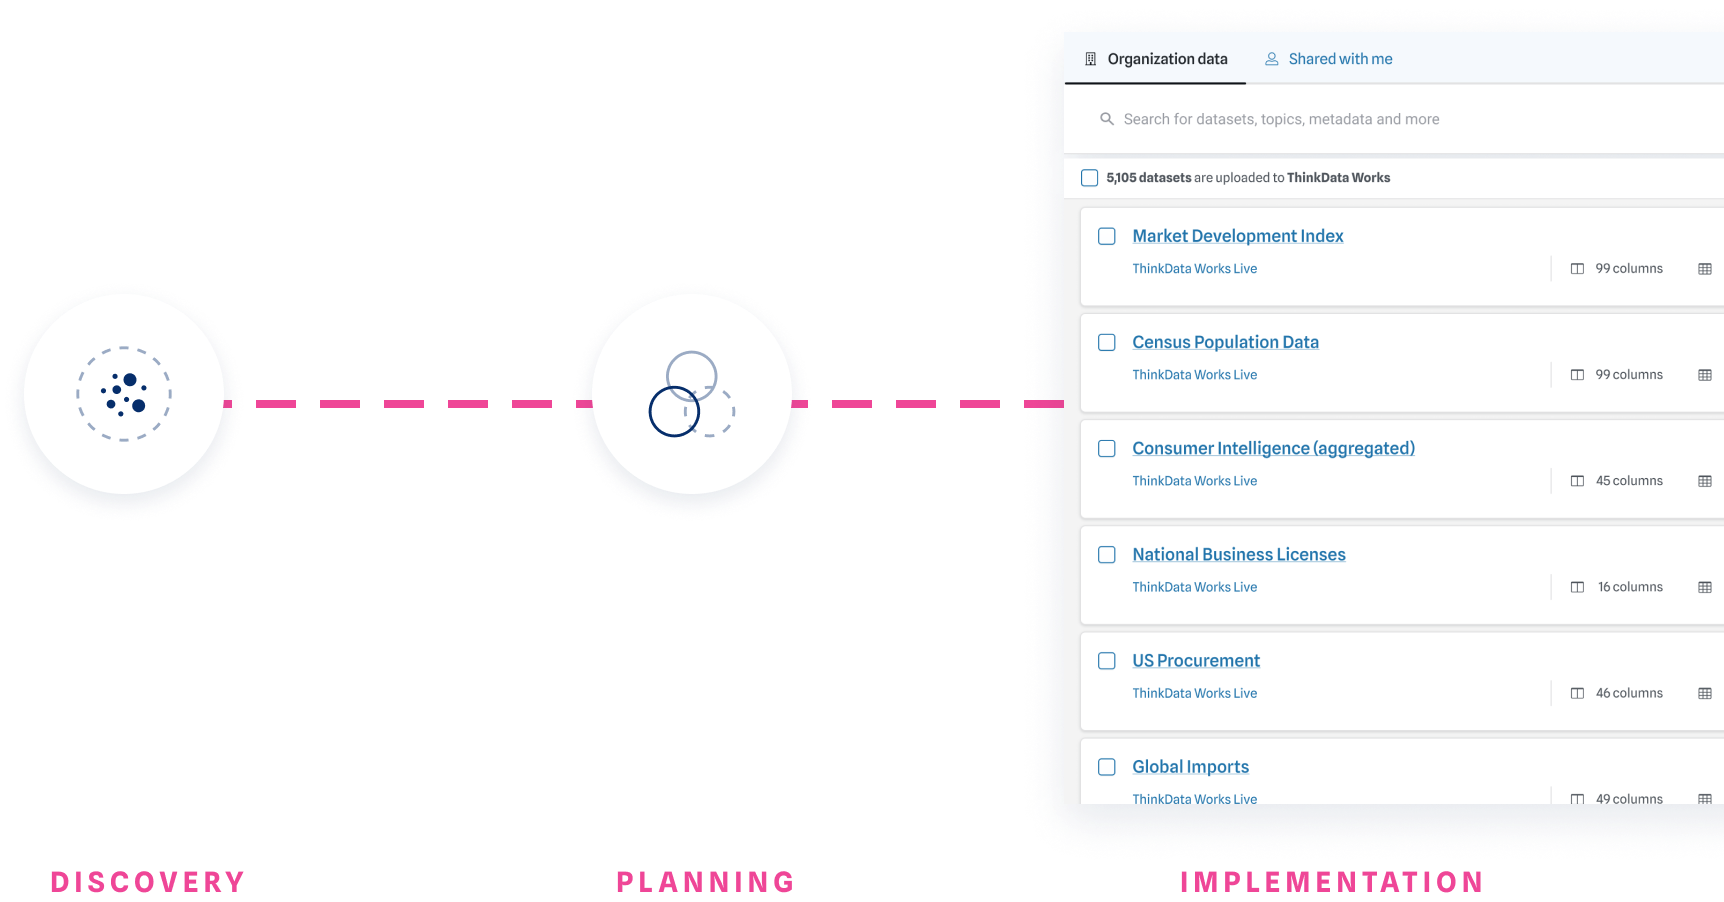 Graphic of data discovery, planning, and implementation into a data catalog platform